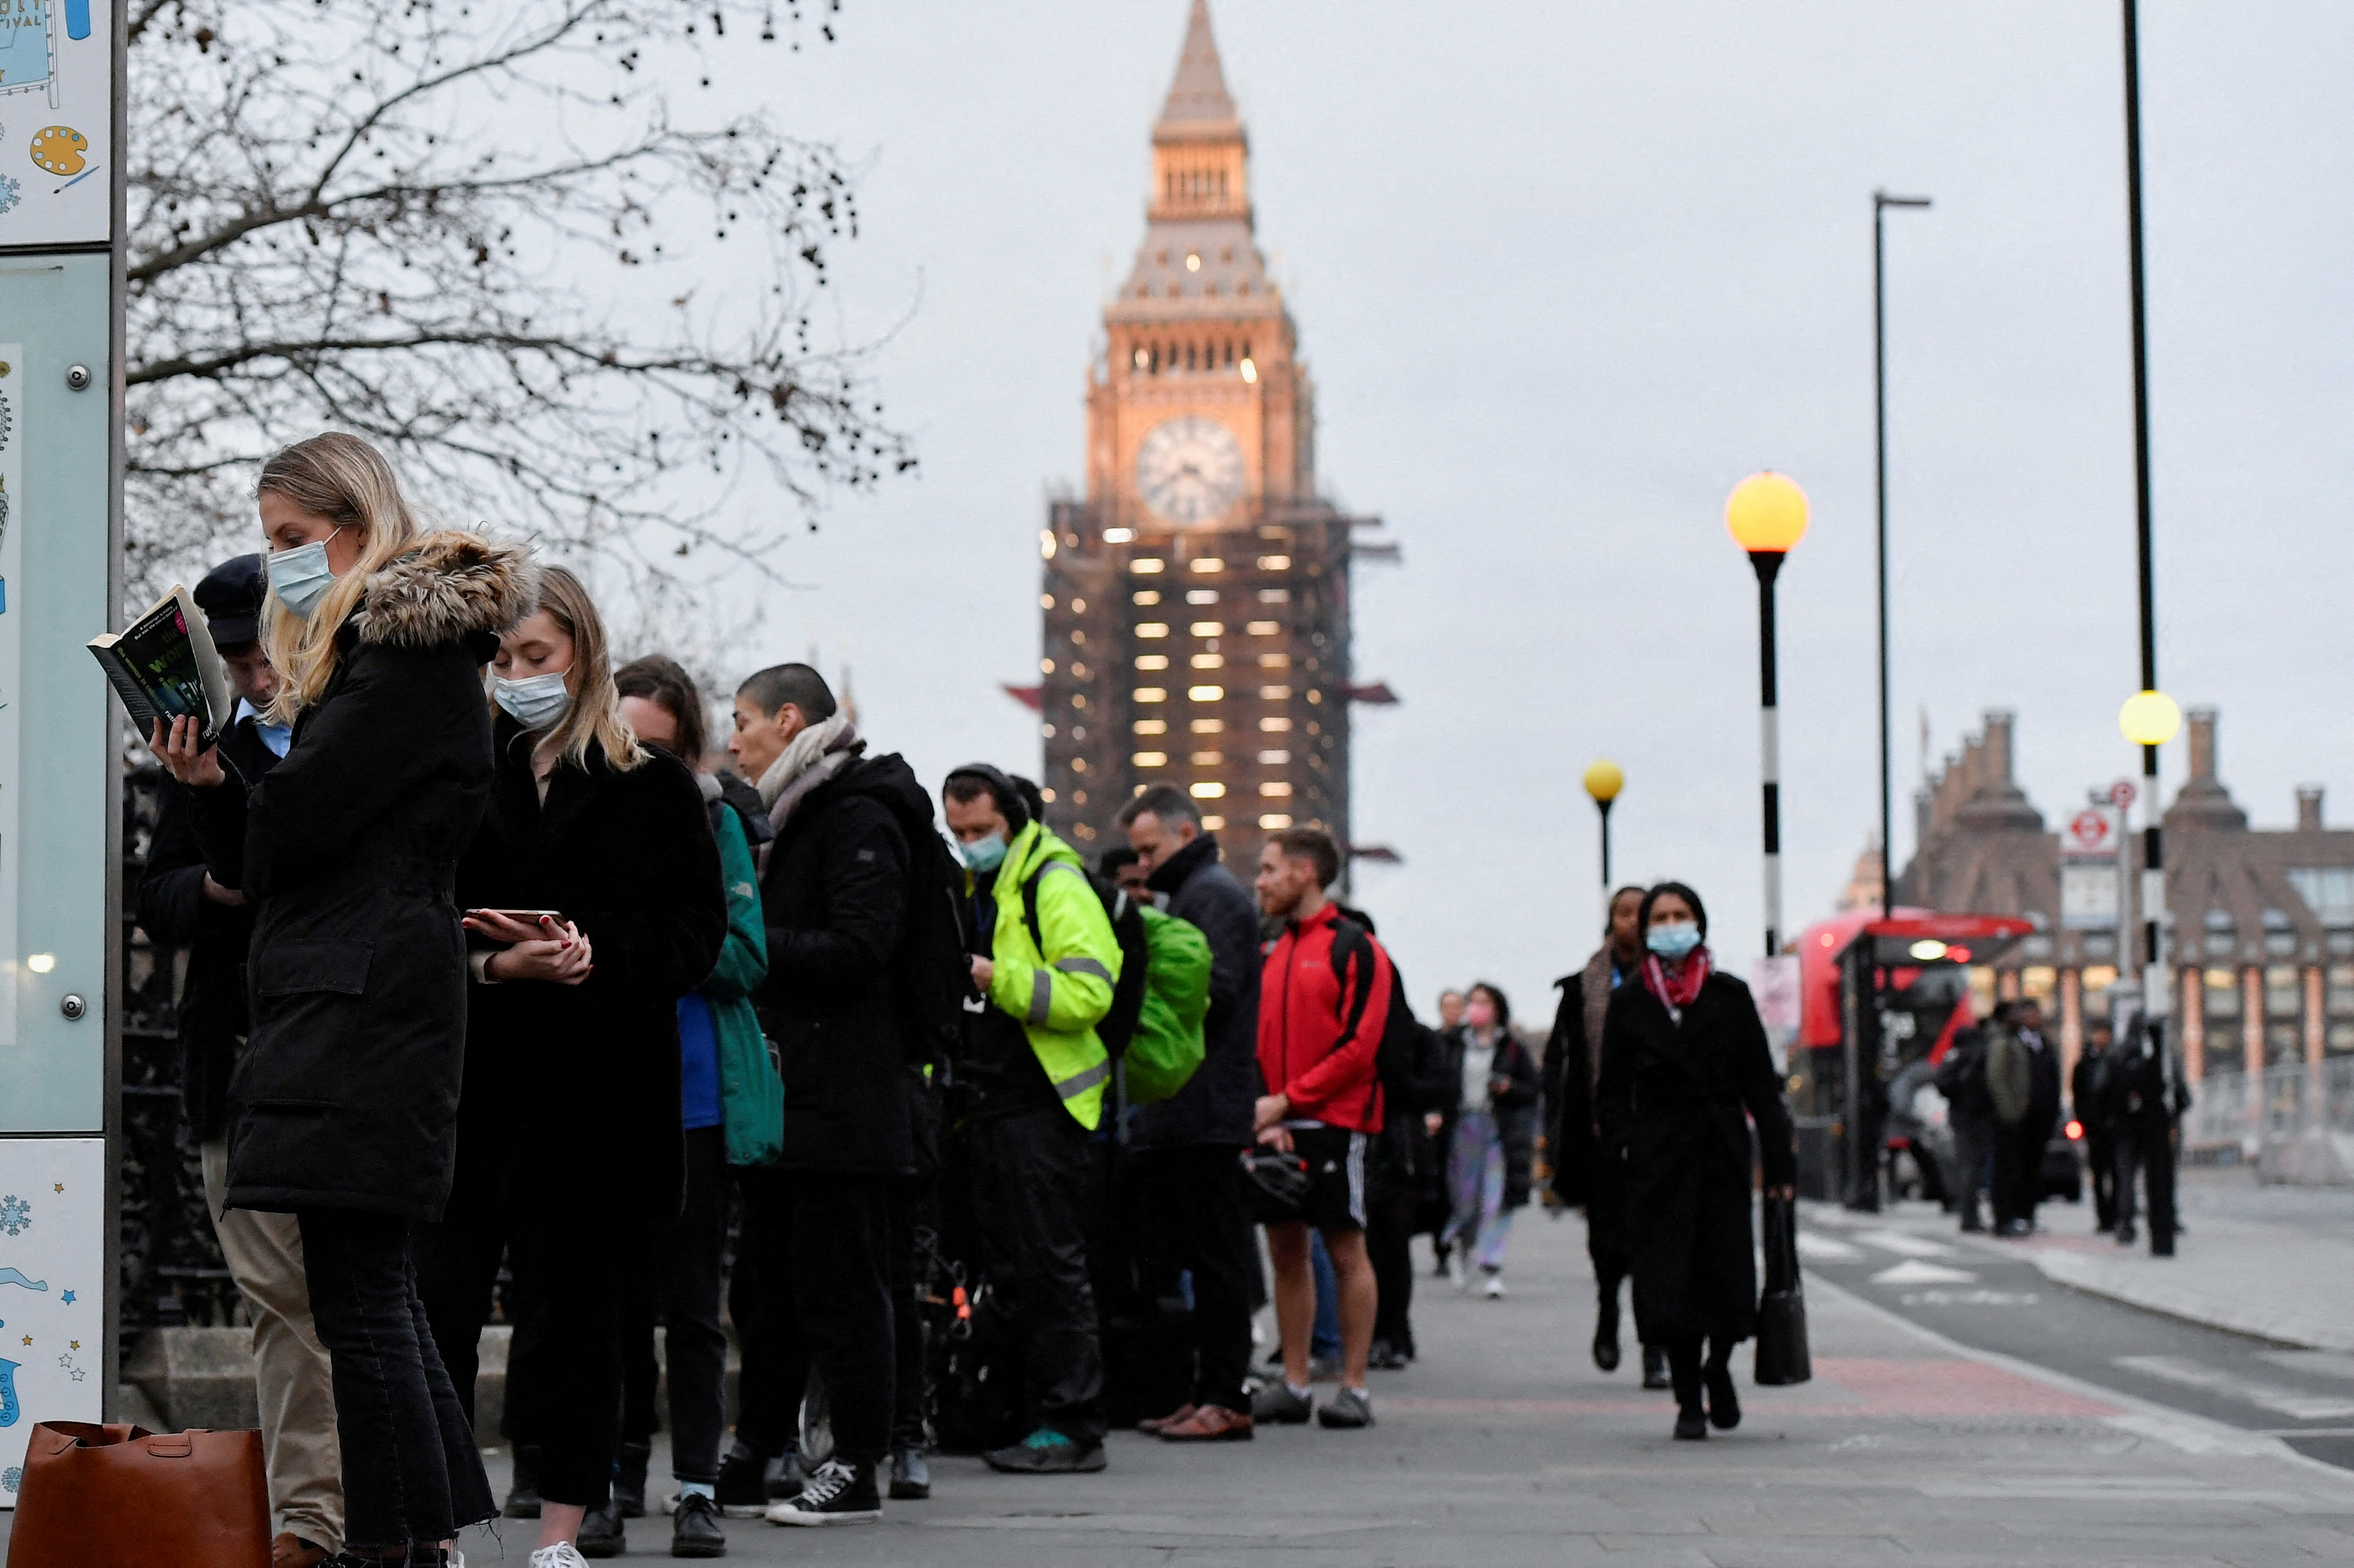 People queue at Westminster Bridge to receive COVID-19 vaccine and booster doses, as the spread of the coronavirus disease (COVID-19) continues, at a walk-in vaccination centre at Saint Thomas' Hospital in London, Britain, December 14, 2021. REUTERS/Toby Melville